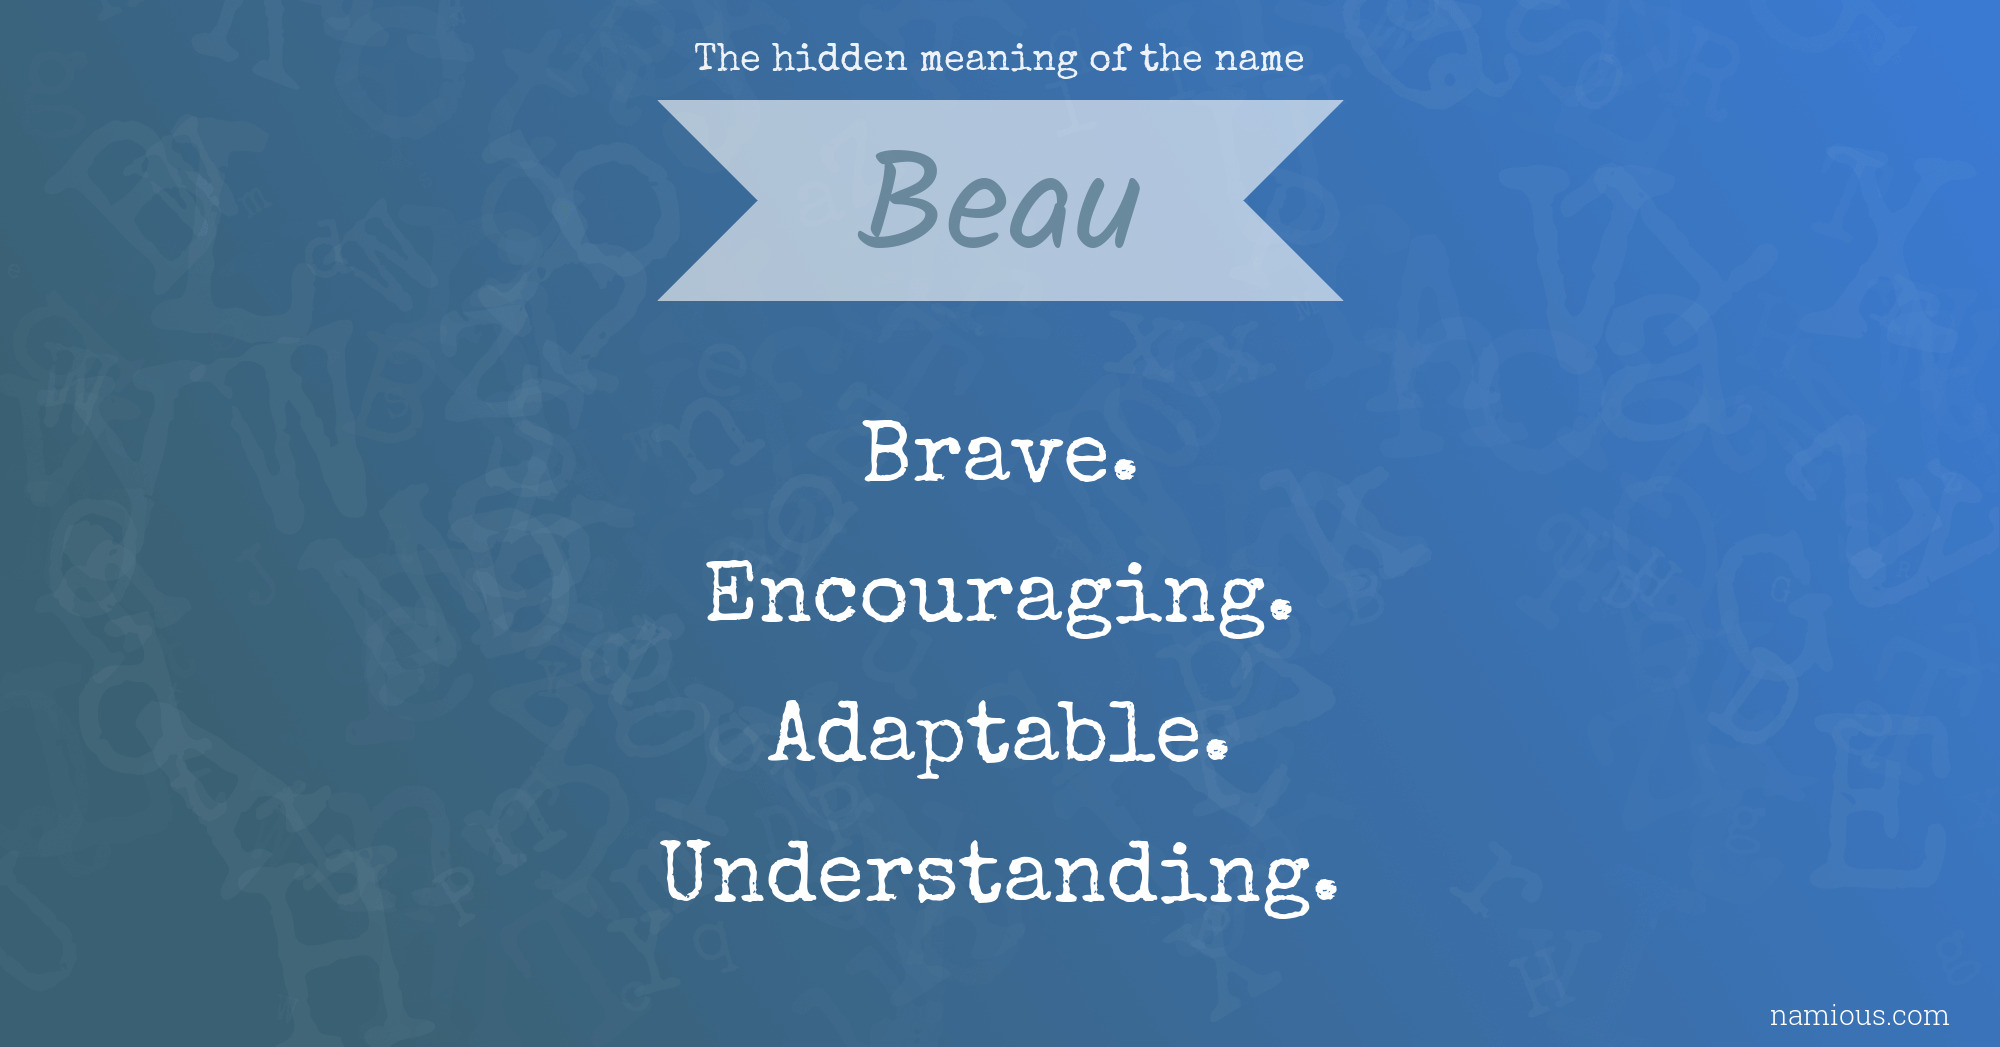 The hidden meaning of the name Beau